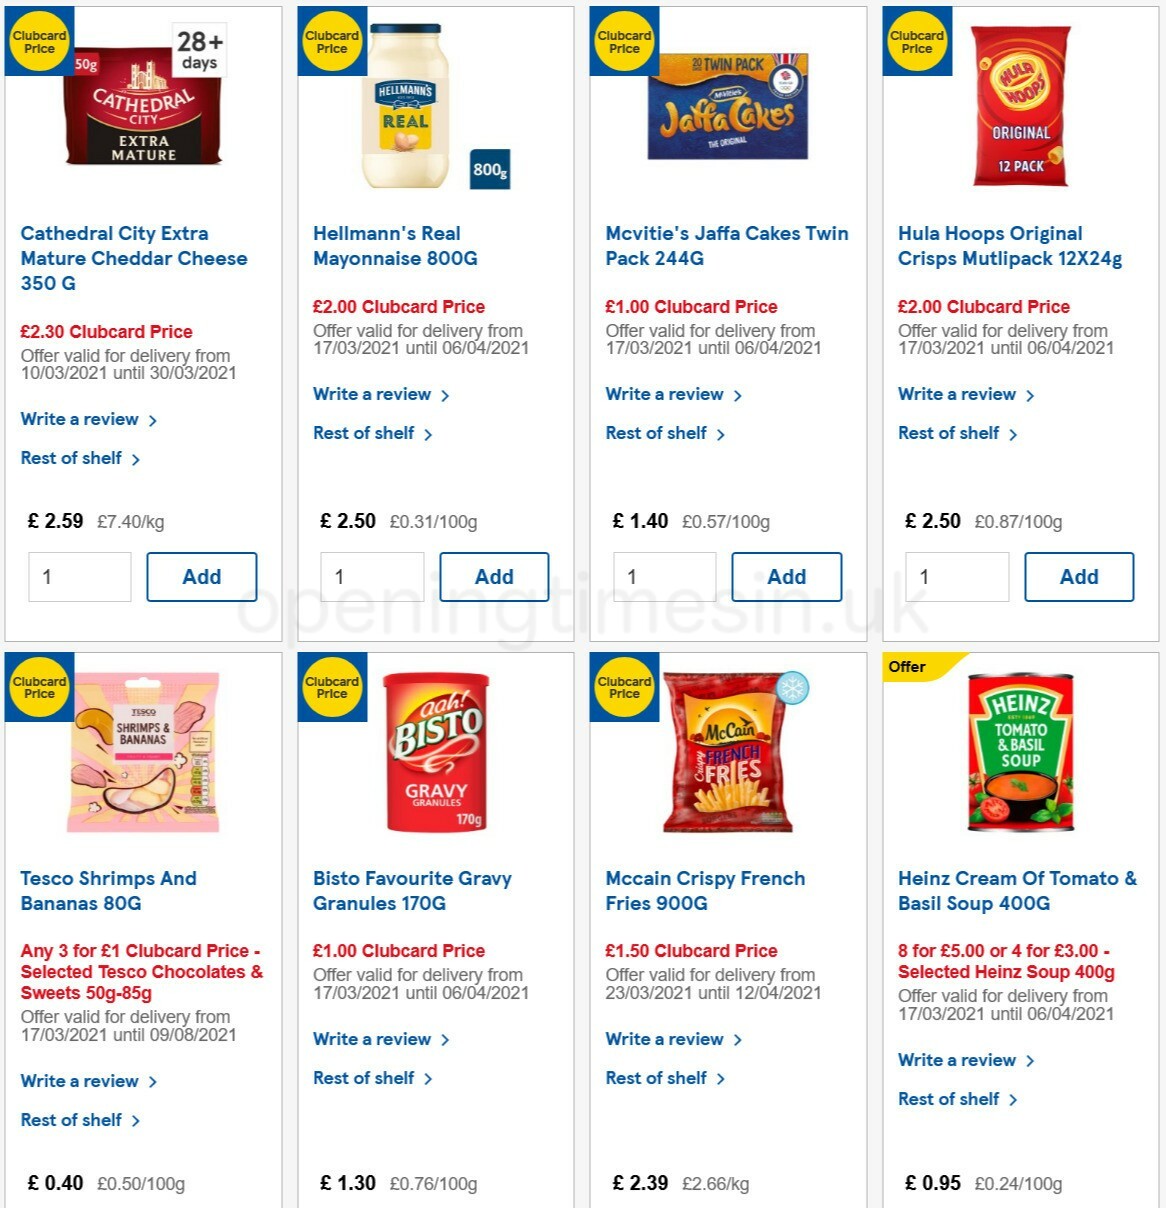 TESCO Offers from 24 March